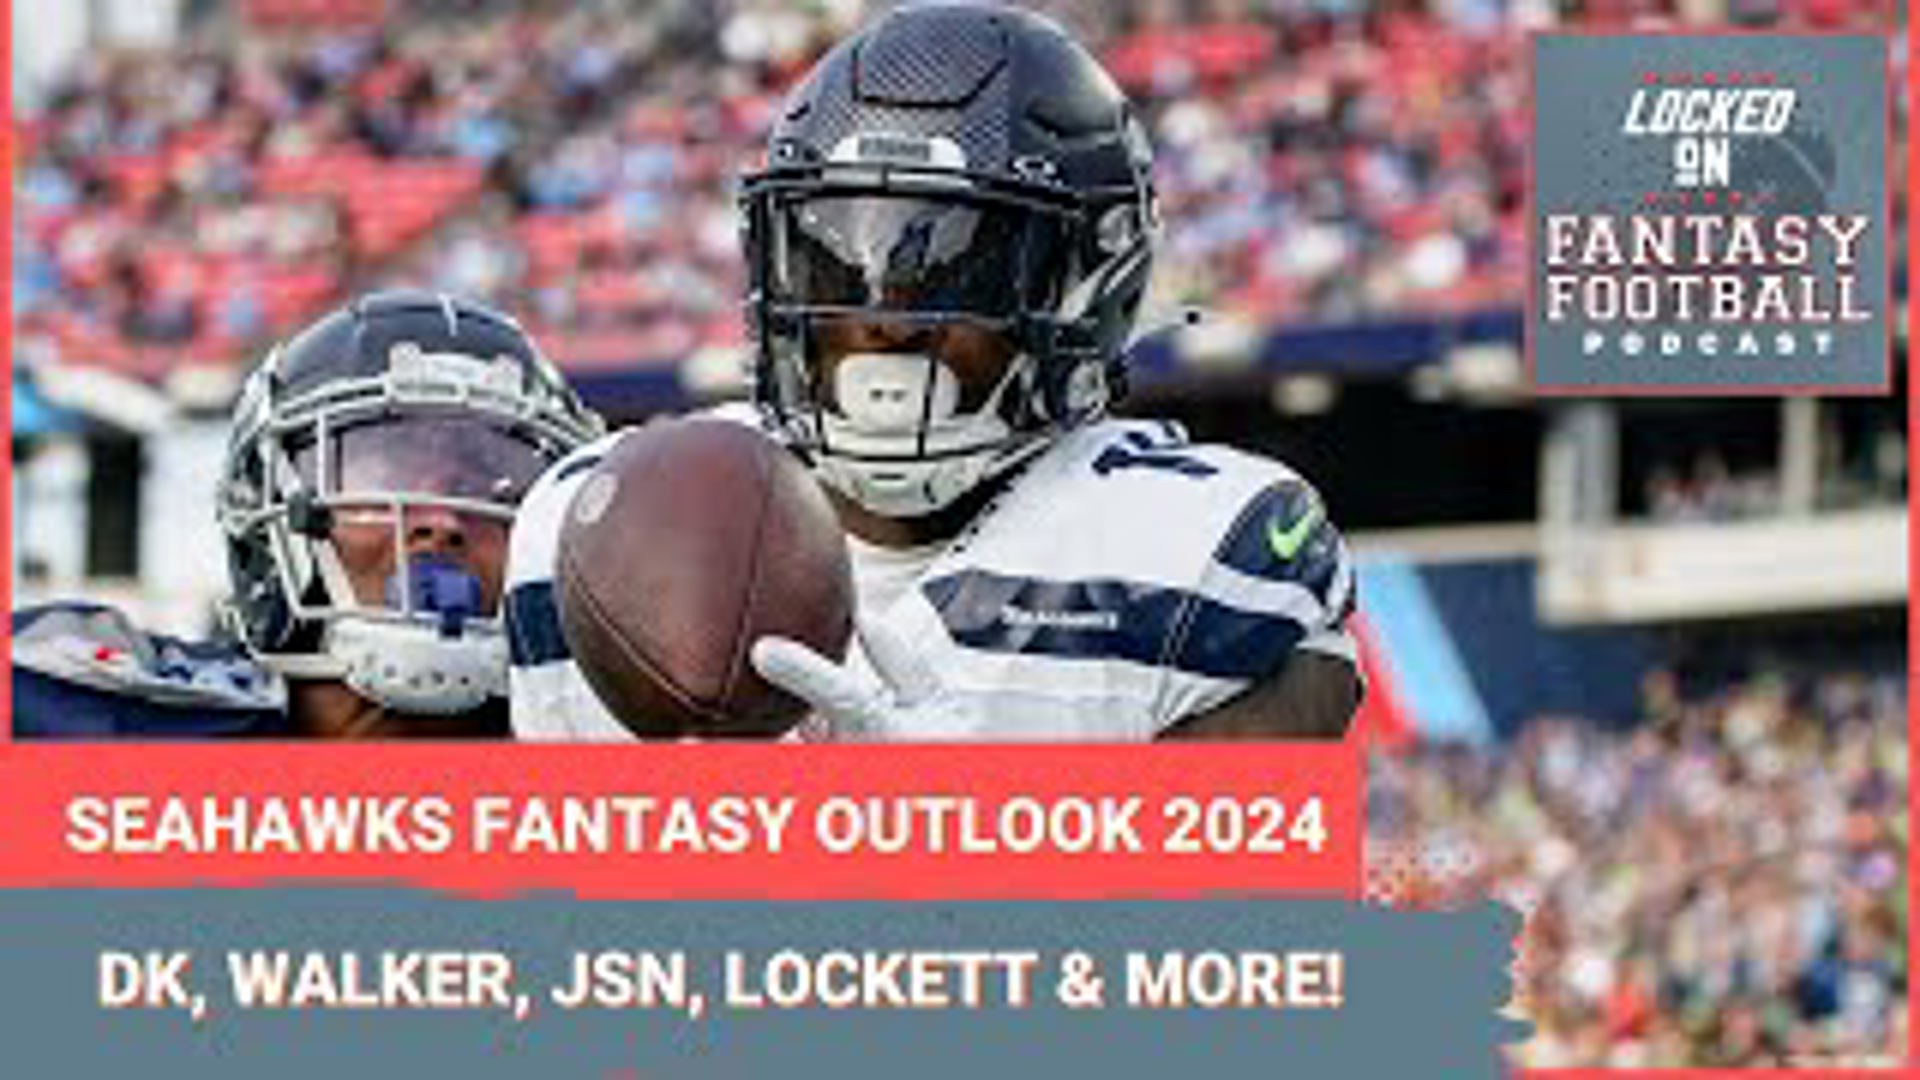 Sporting News.com's Vinnie Iyer and NFL.com's Michelle Magdziuk break down the fantasy football potential of the 2024 Seattle Seahawks.